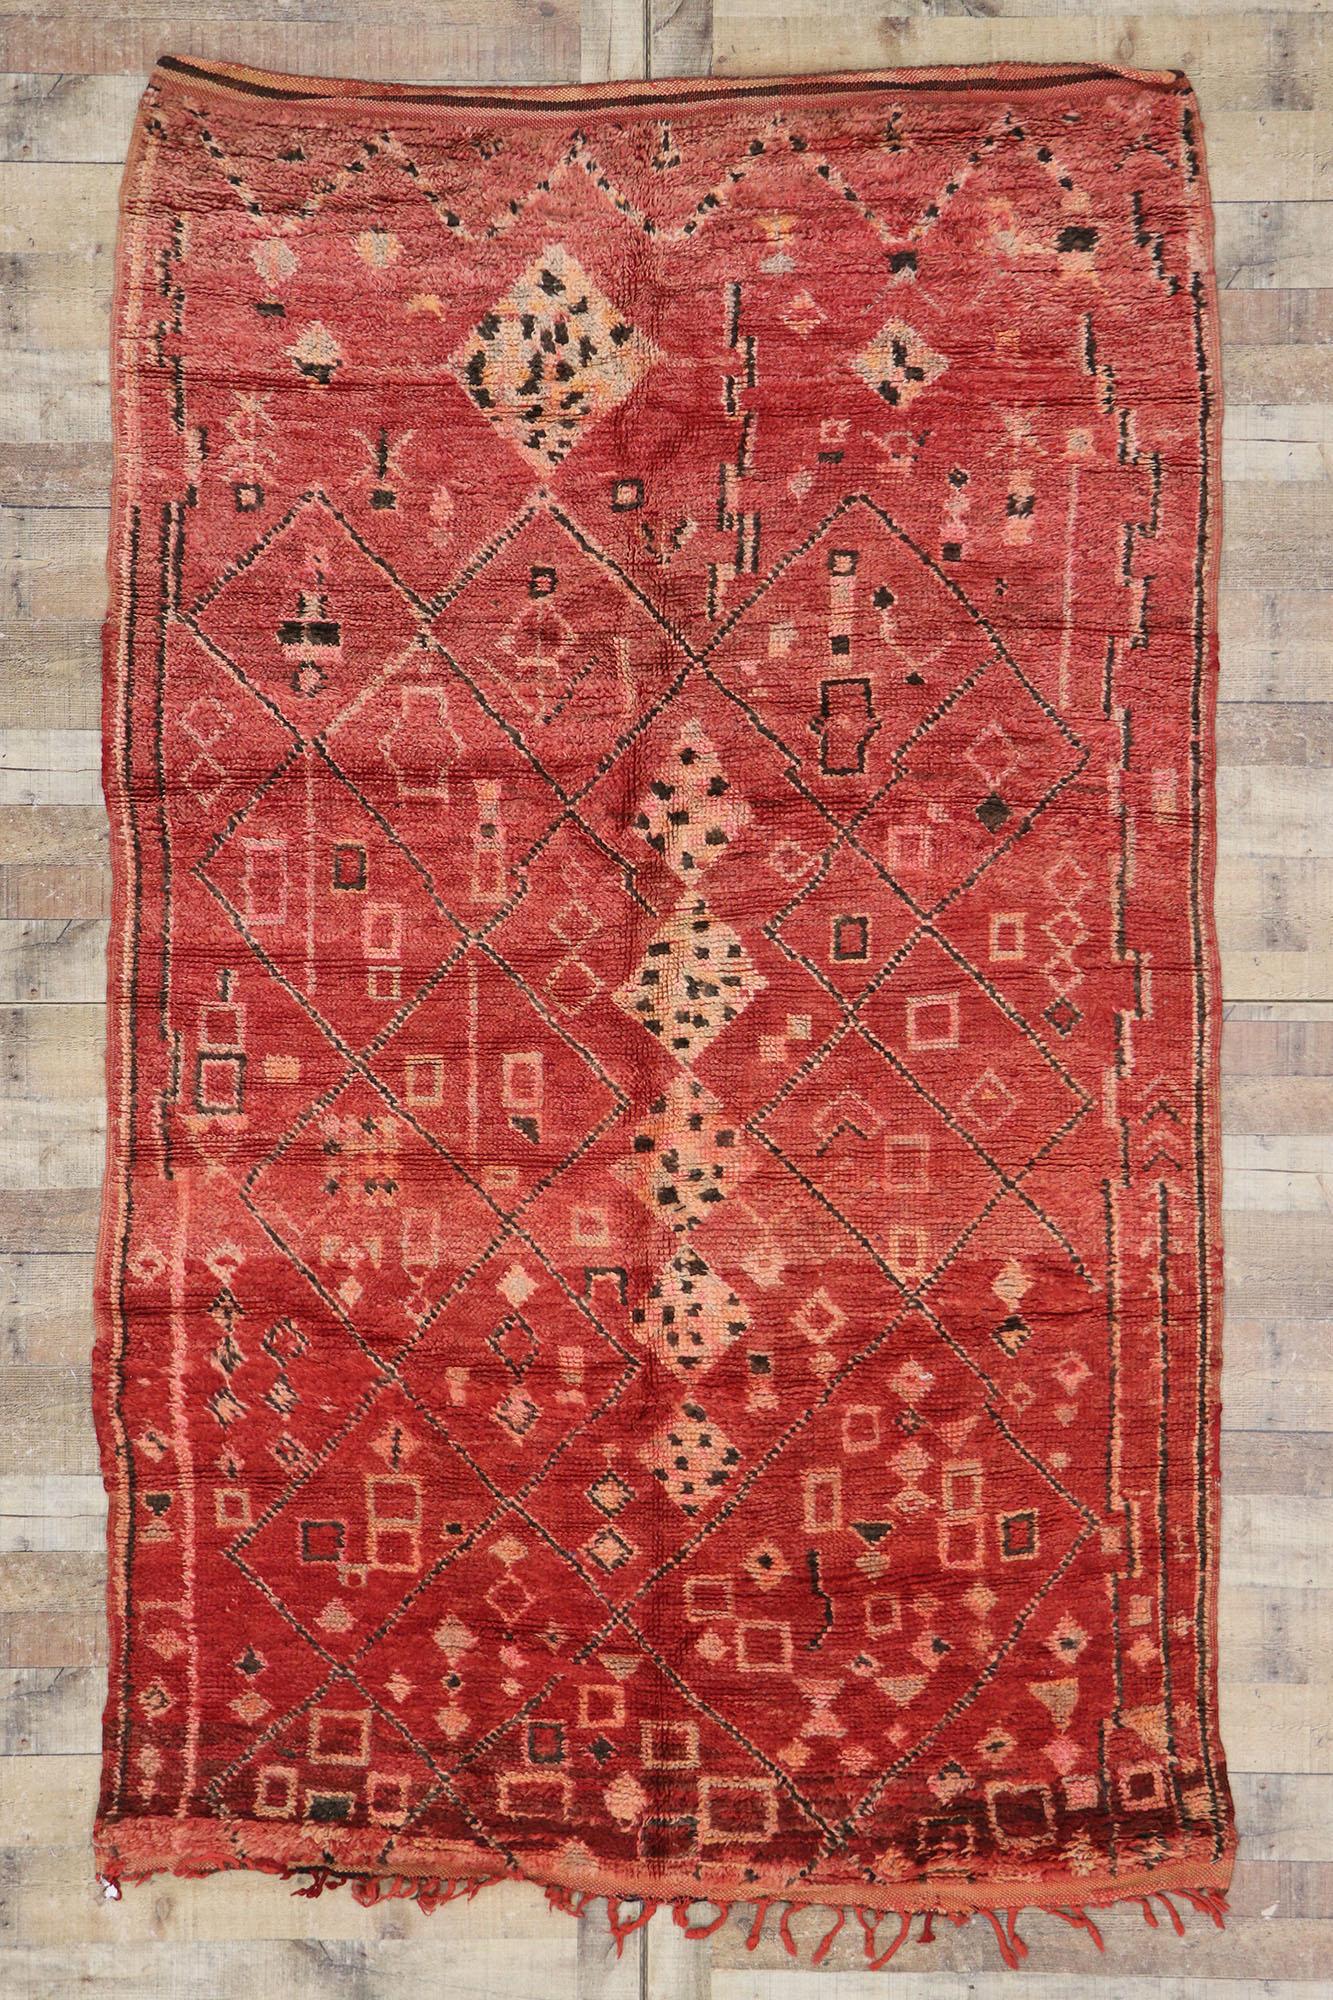 Vintage Red Boujad Moroccan Rug by Berber Tribes of Morocco In Good Condition For Sale In Dallas, TX